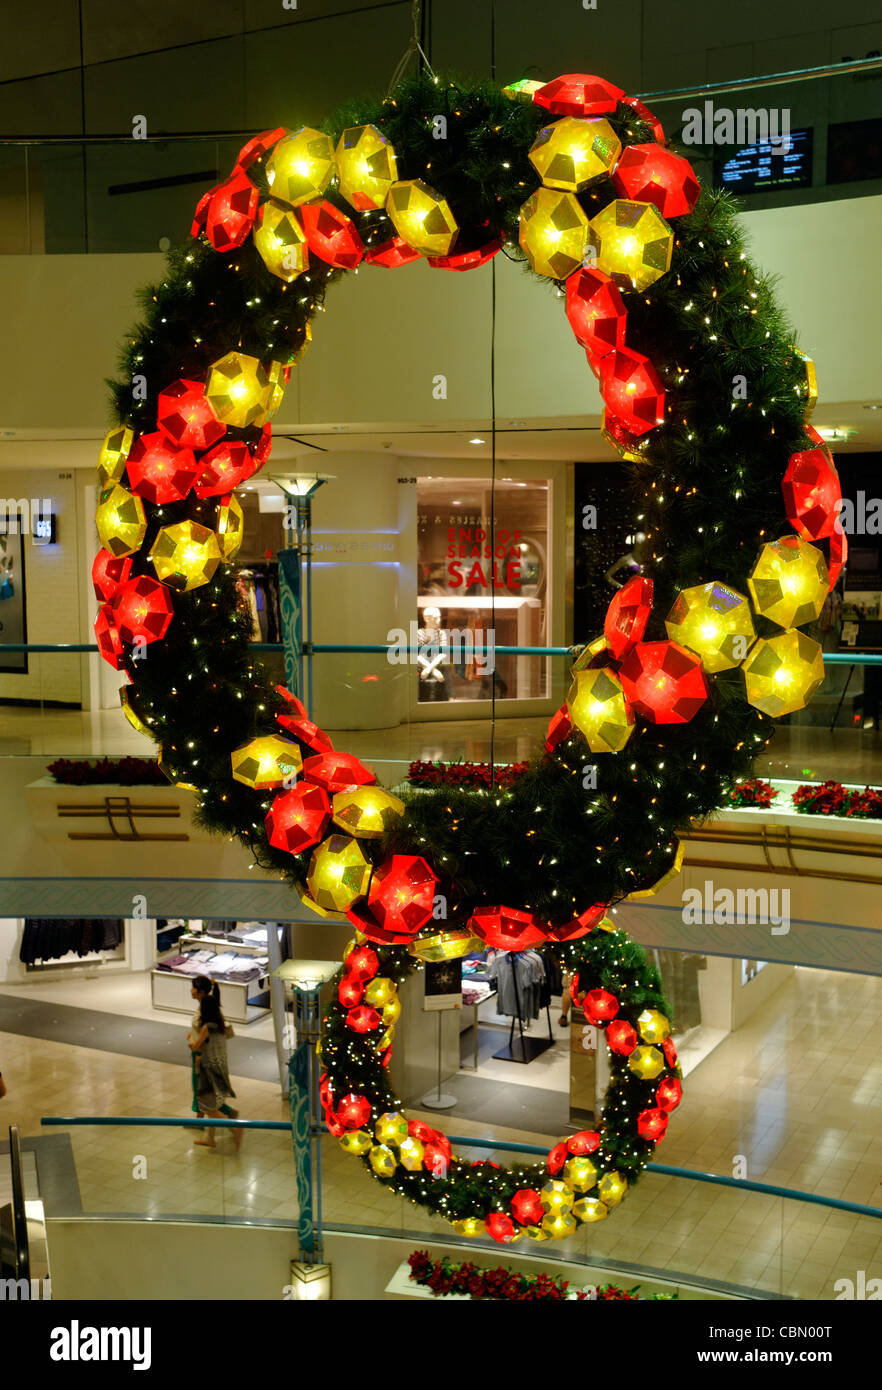 Illuminated Christmas garlands form the decorations for Raffles City shopping mall in Singapore Stock Photo